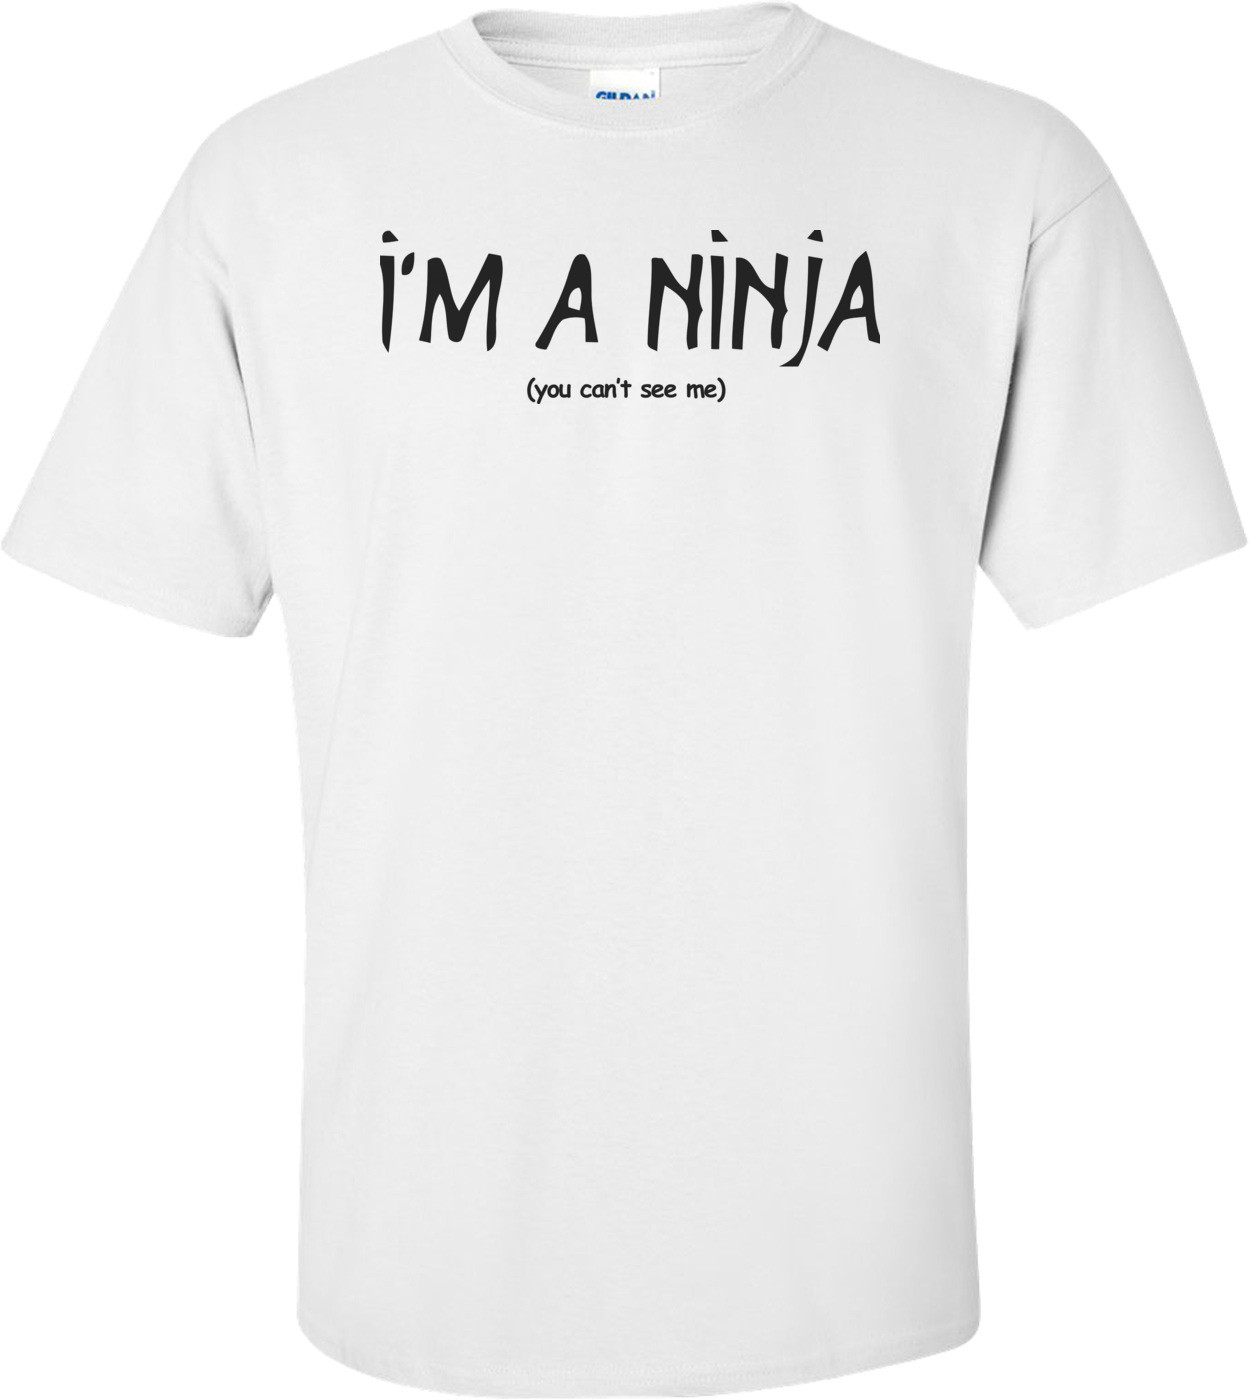 I'm A Ninja You Can't See Me T-Shirt 